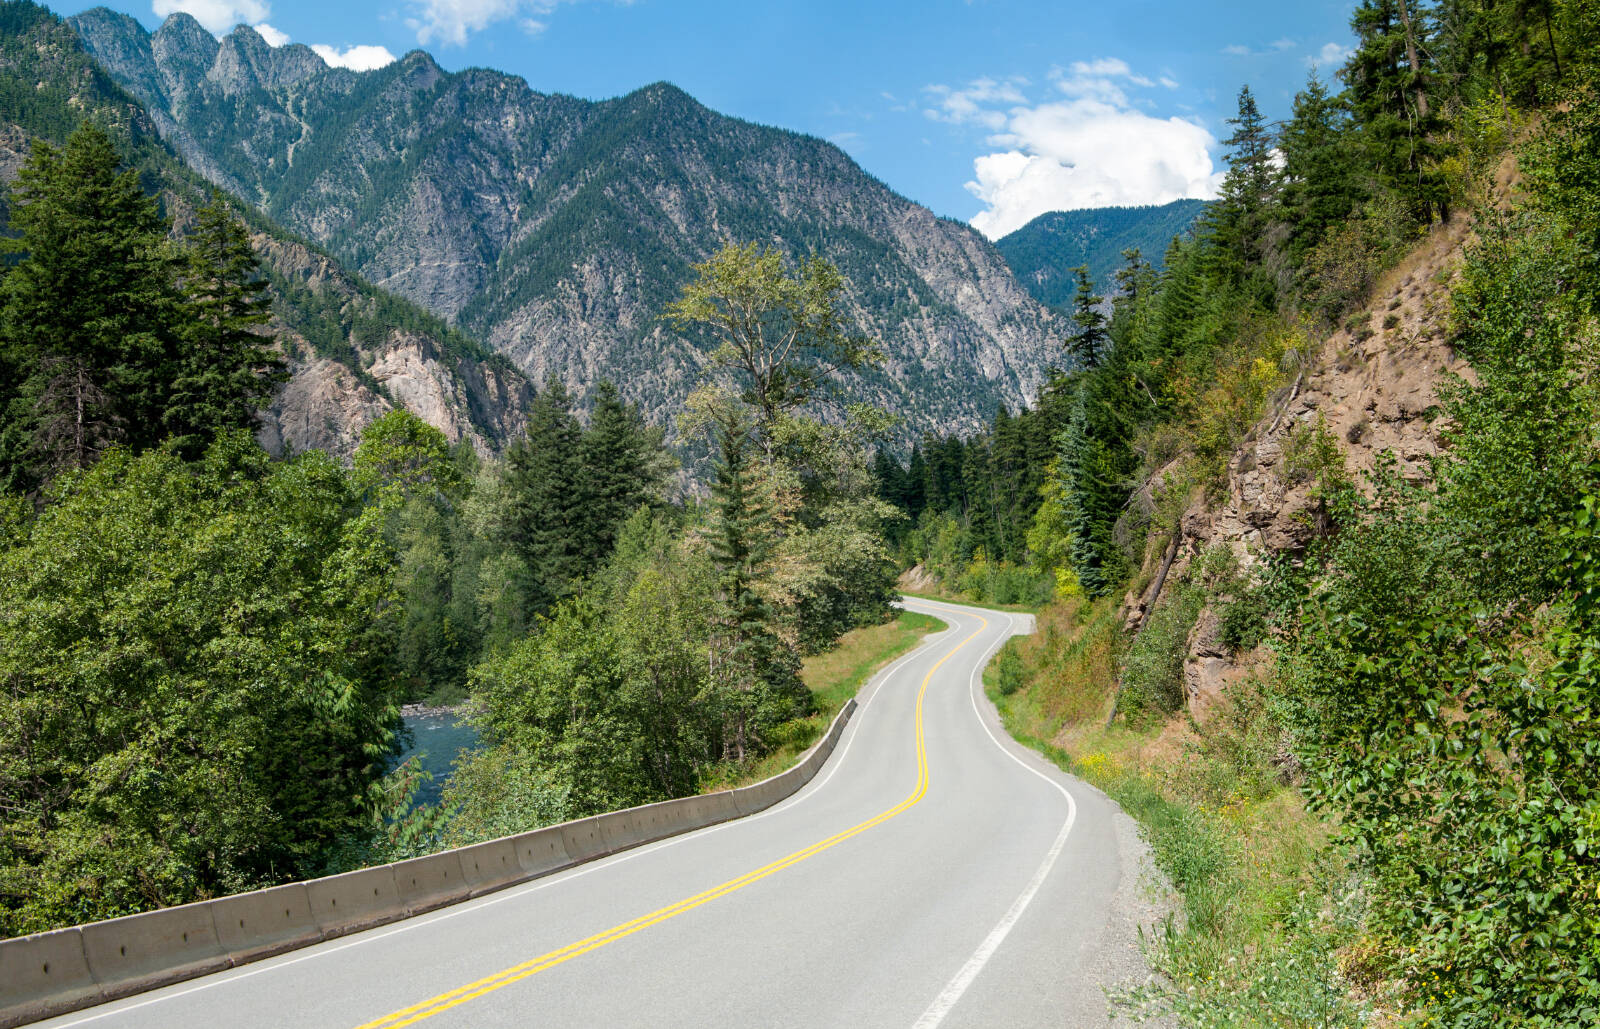 British Columbia is a vast province and those looking for that final summer road trip should research the endless opportunities that exist away from communities affected by wildfires.